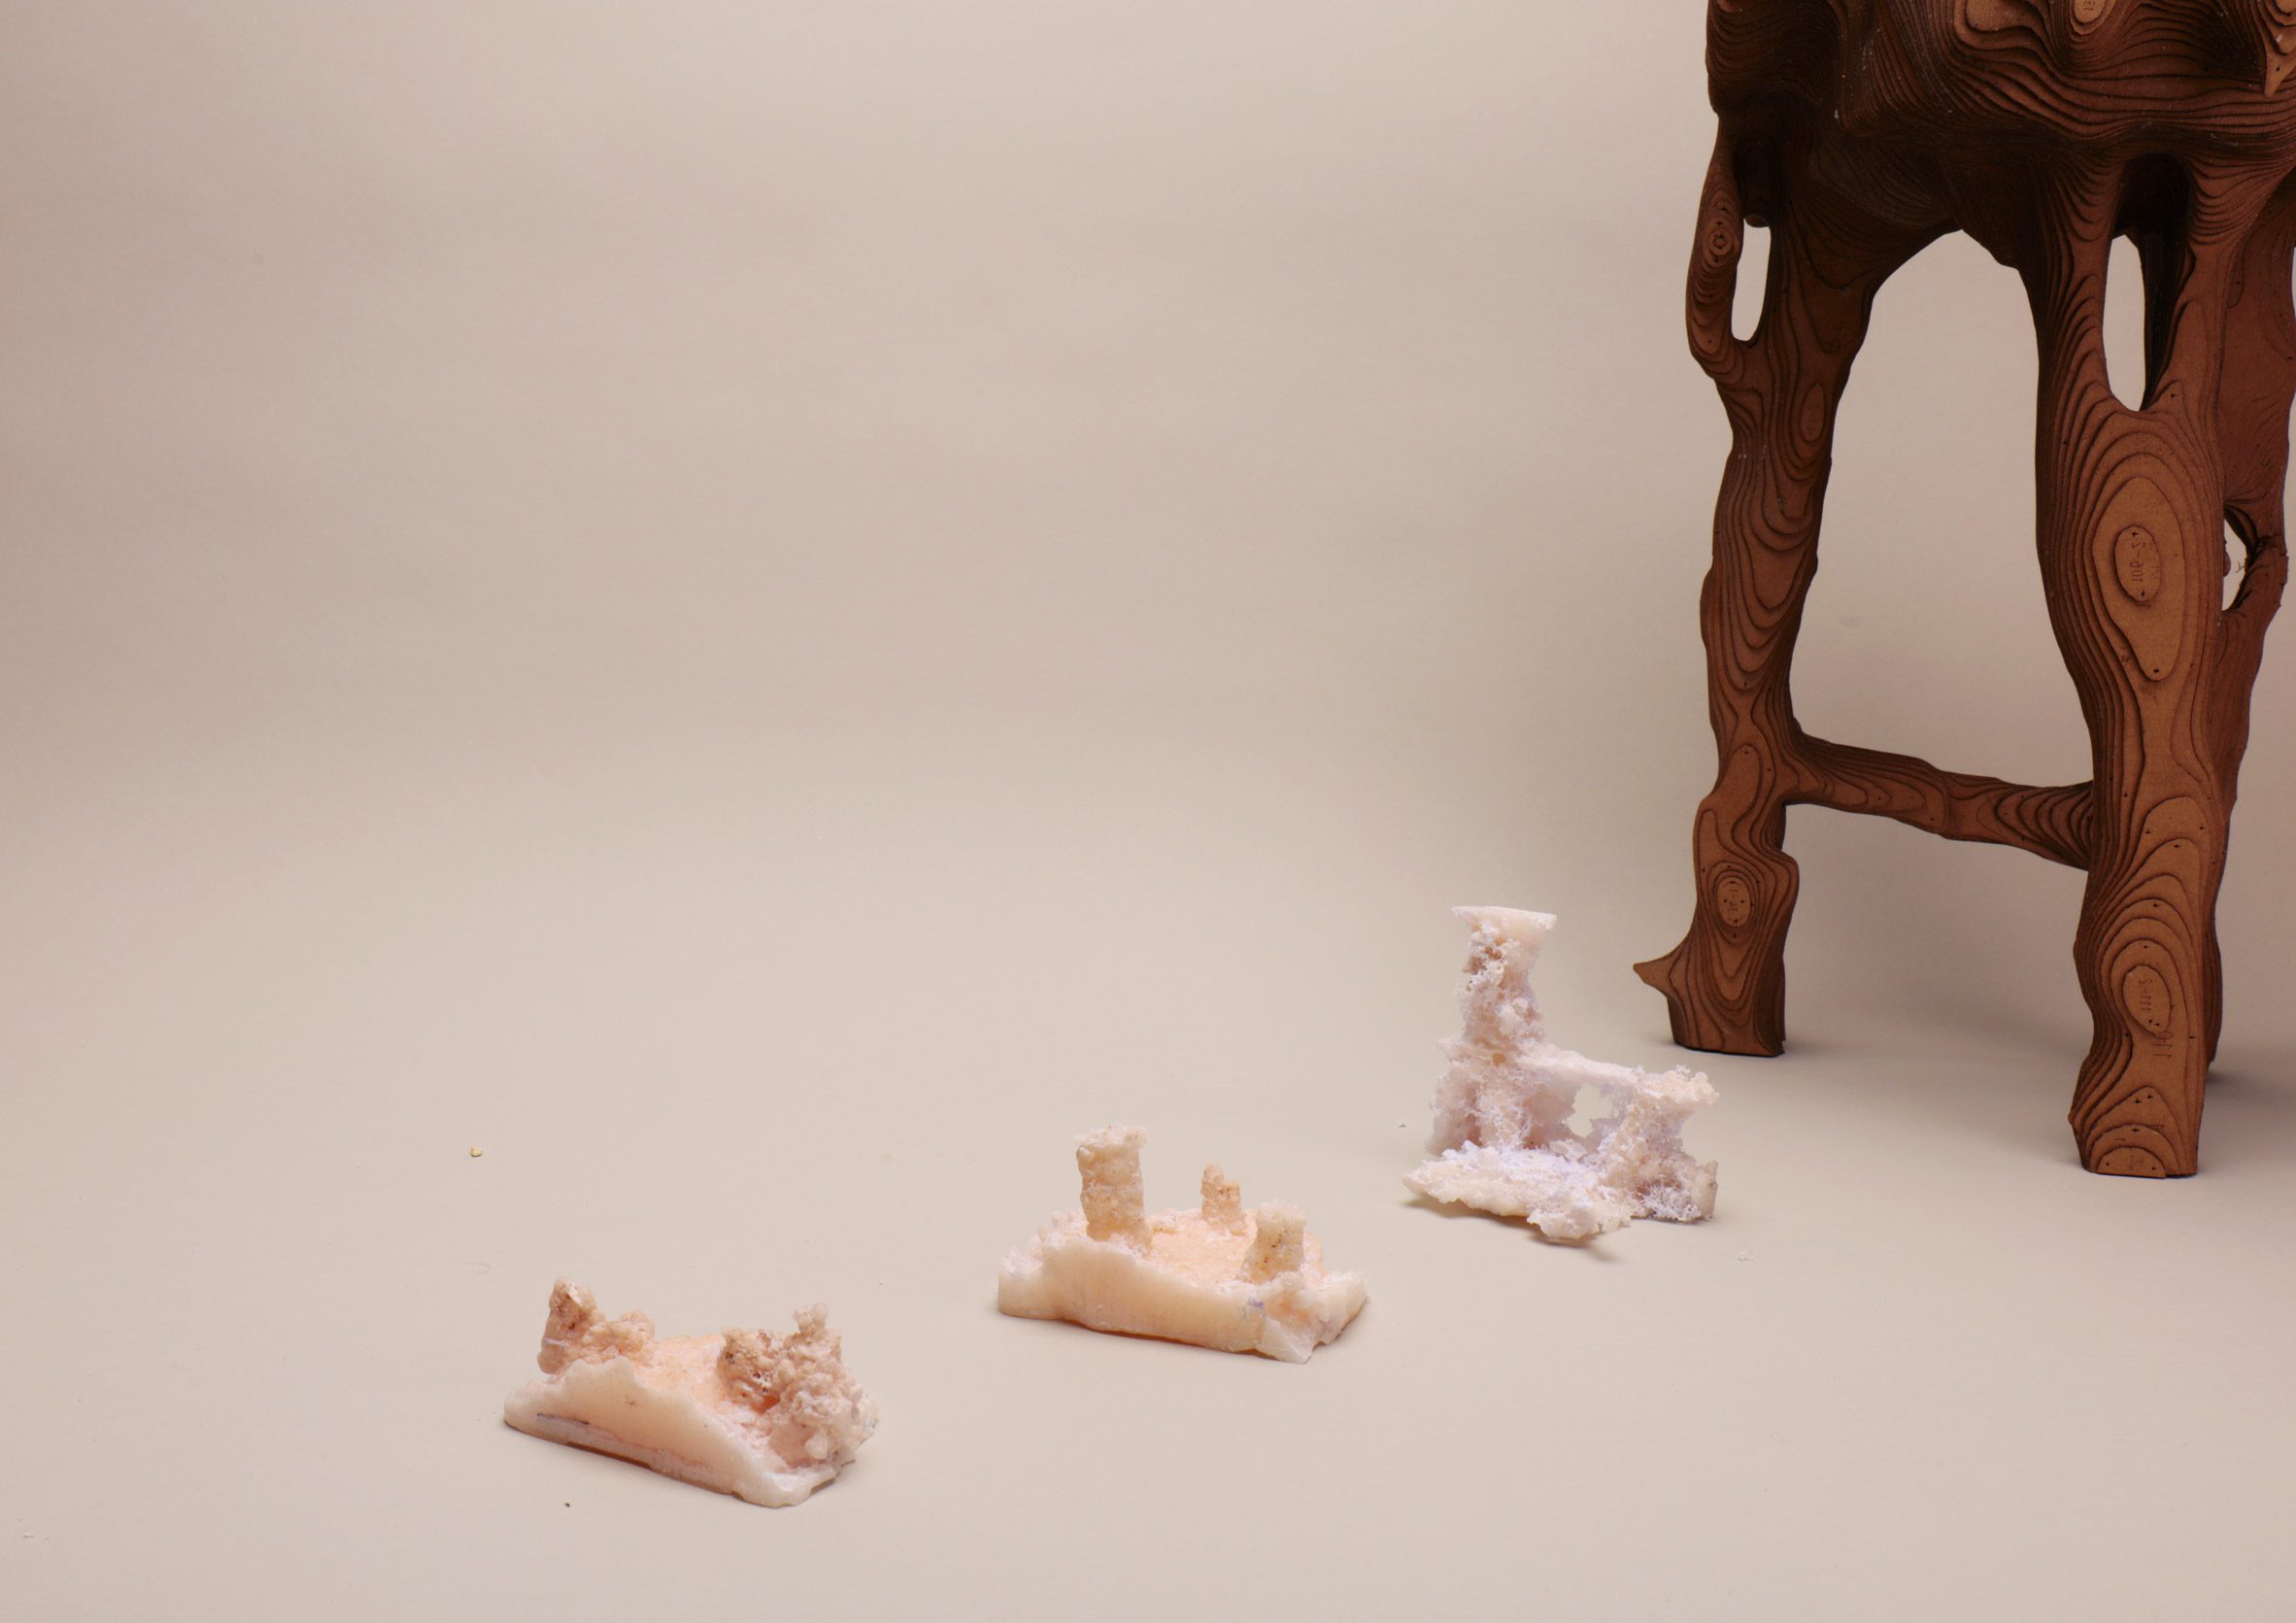 Photo of small, chewed-looking wax models used by William Eliot in the Digested Objects project